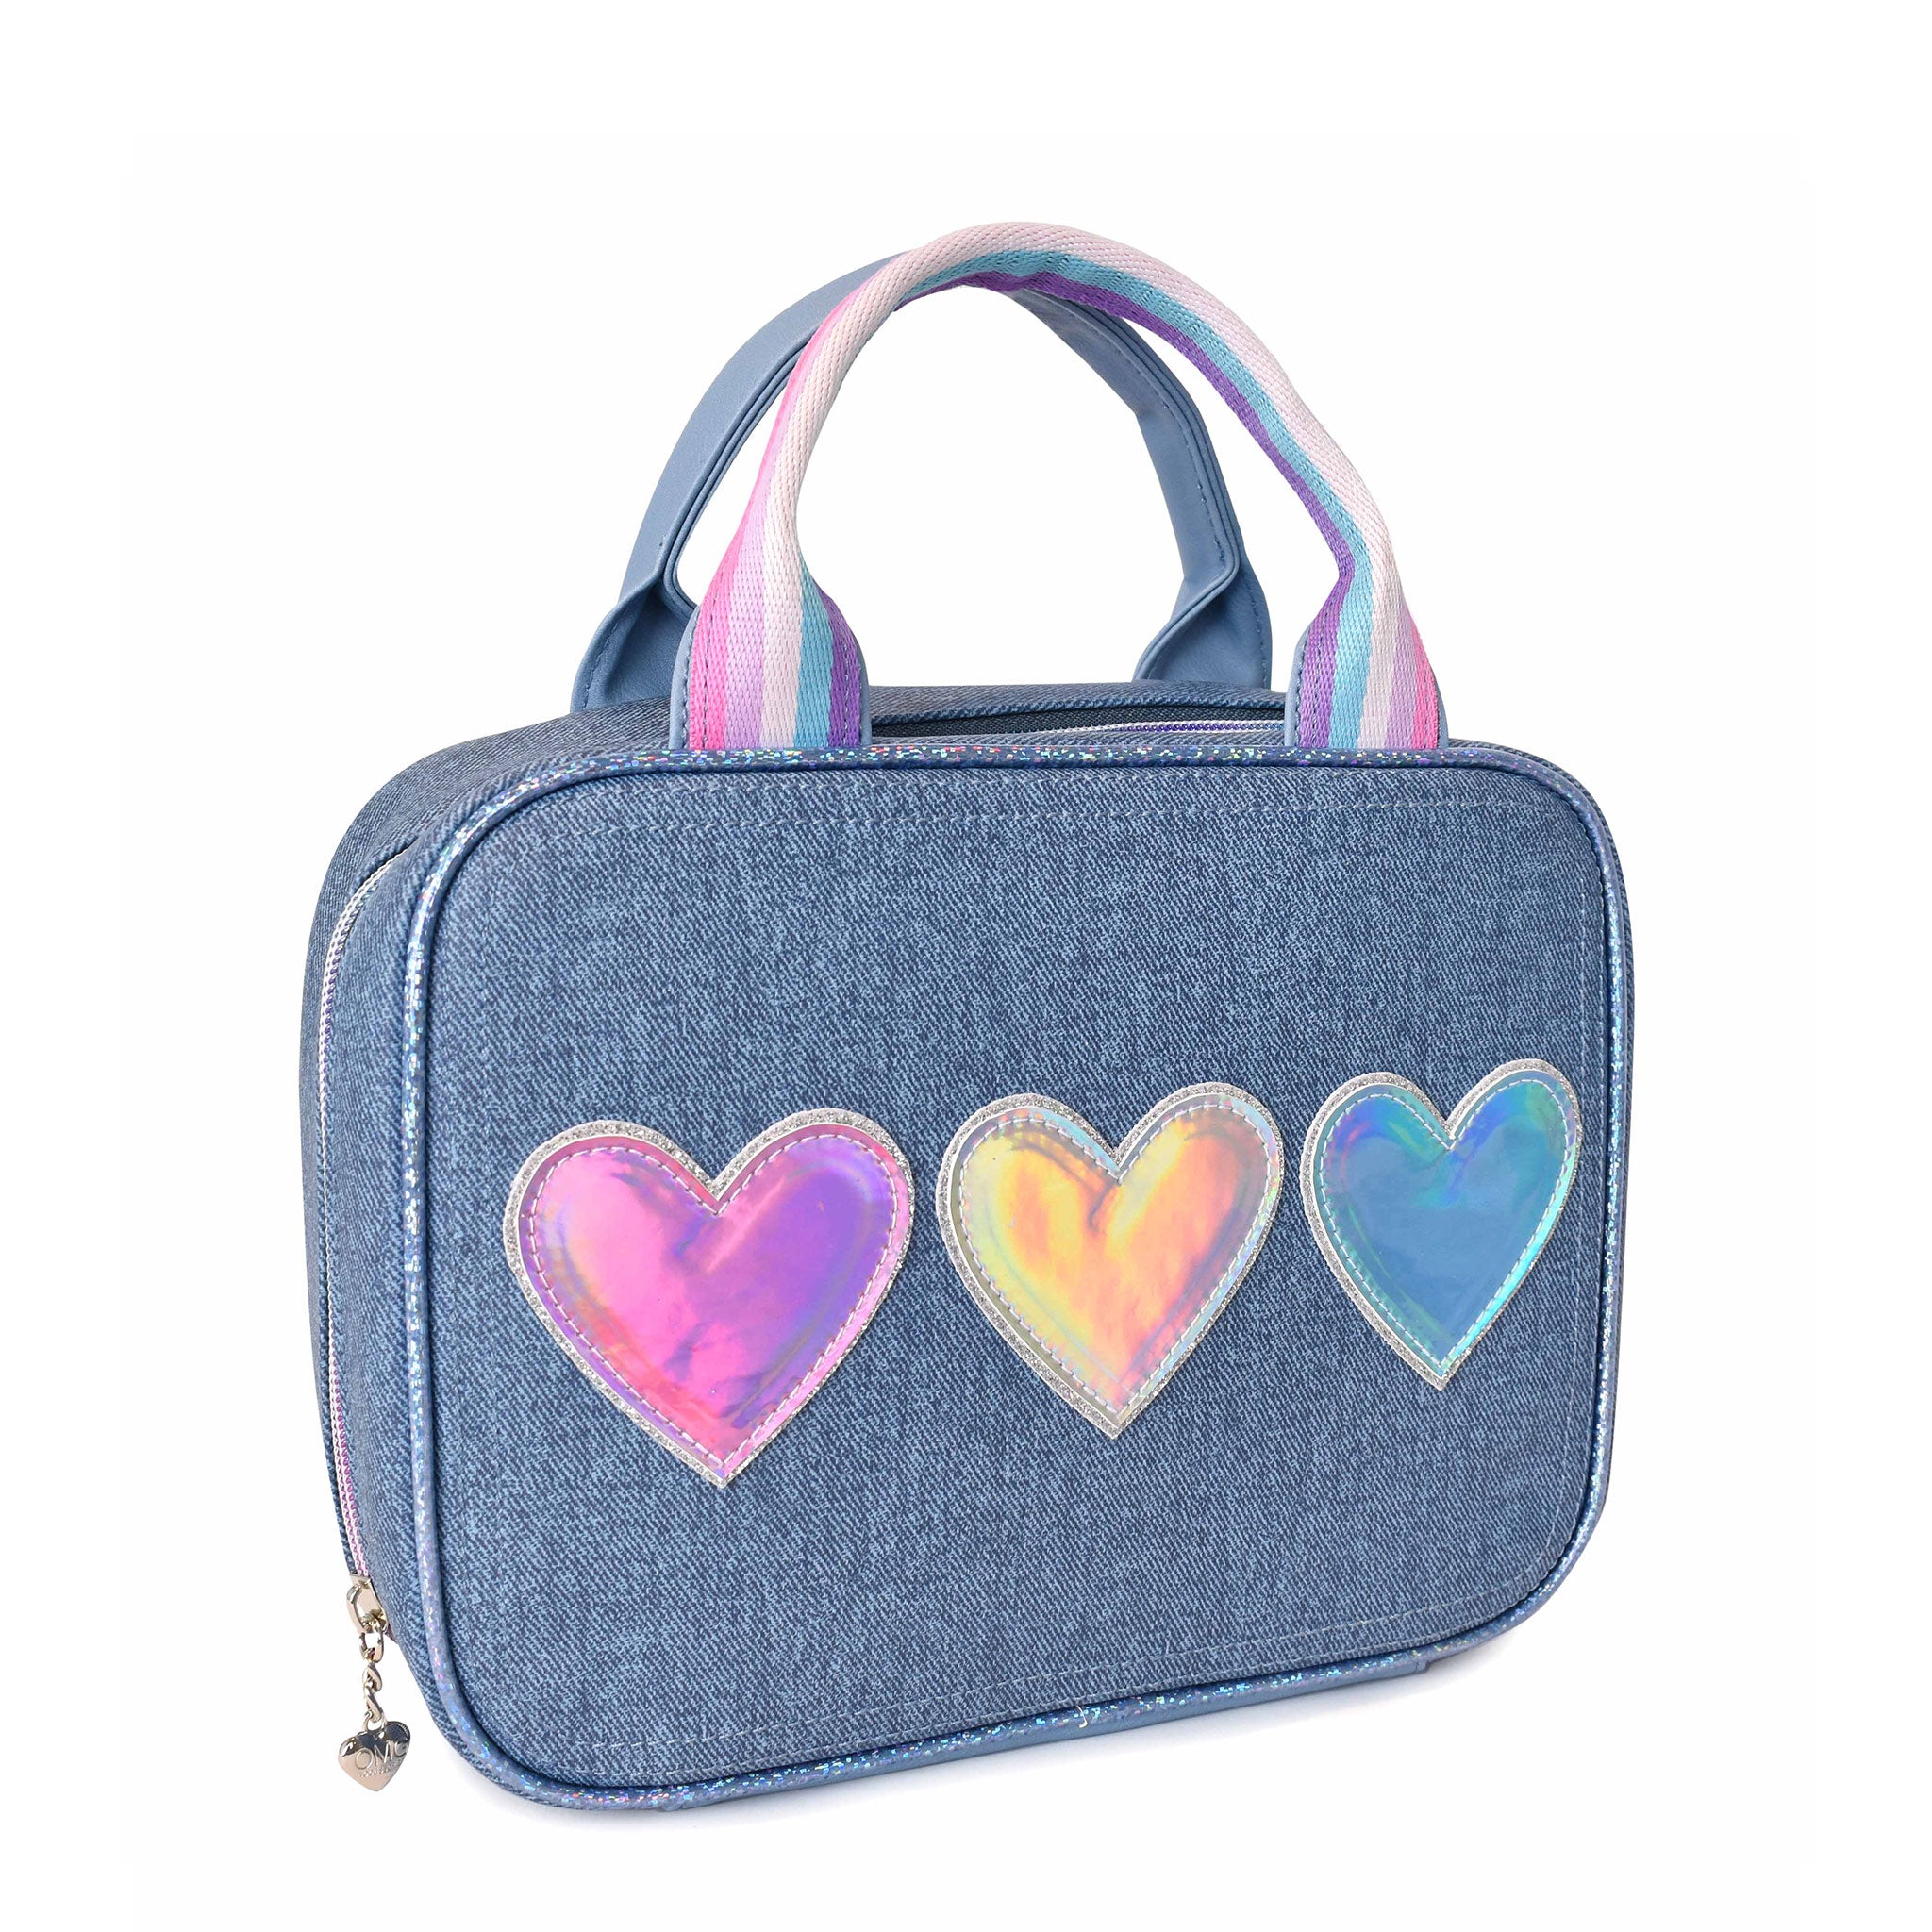 Side view of a denim print rectangular lunch bag with three metallic heart patches